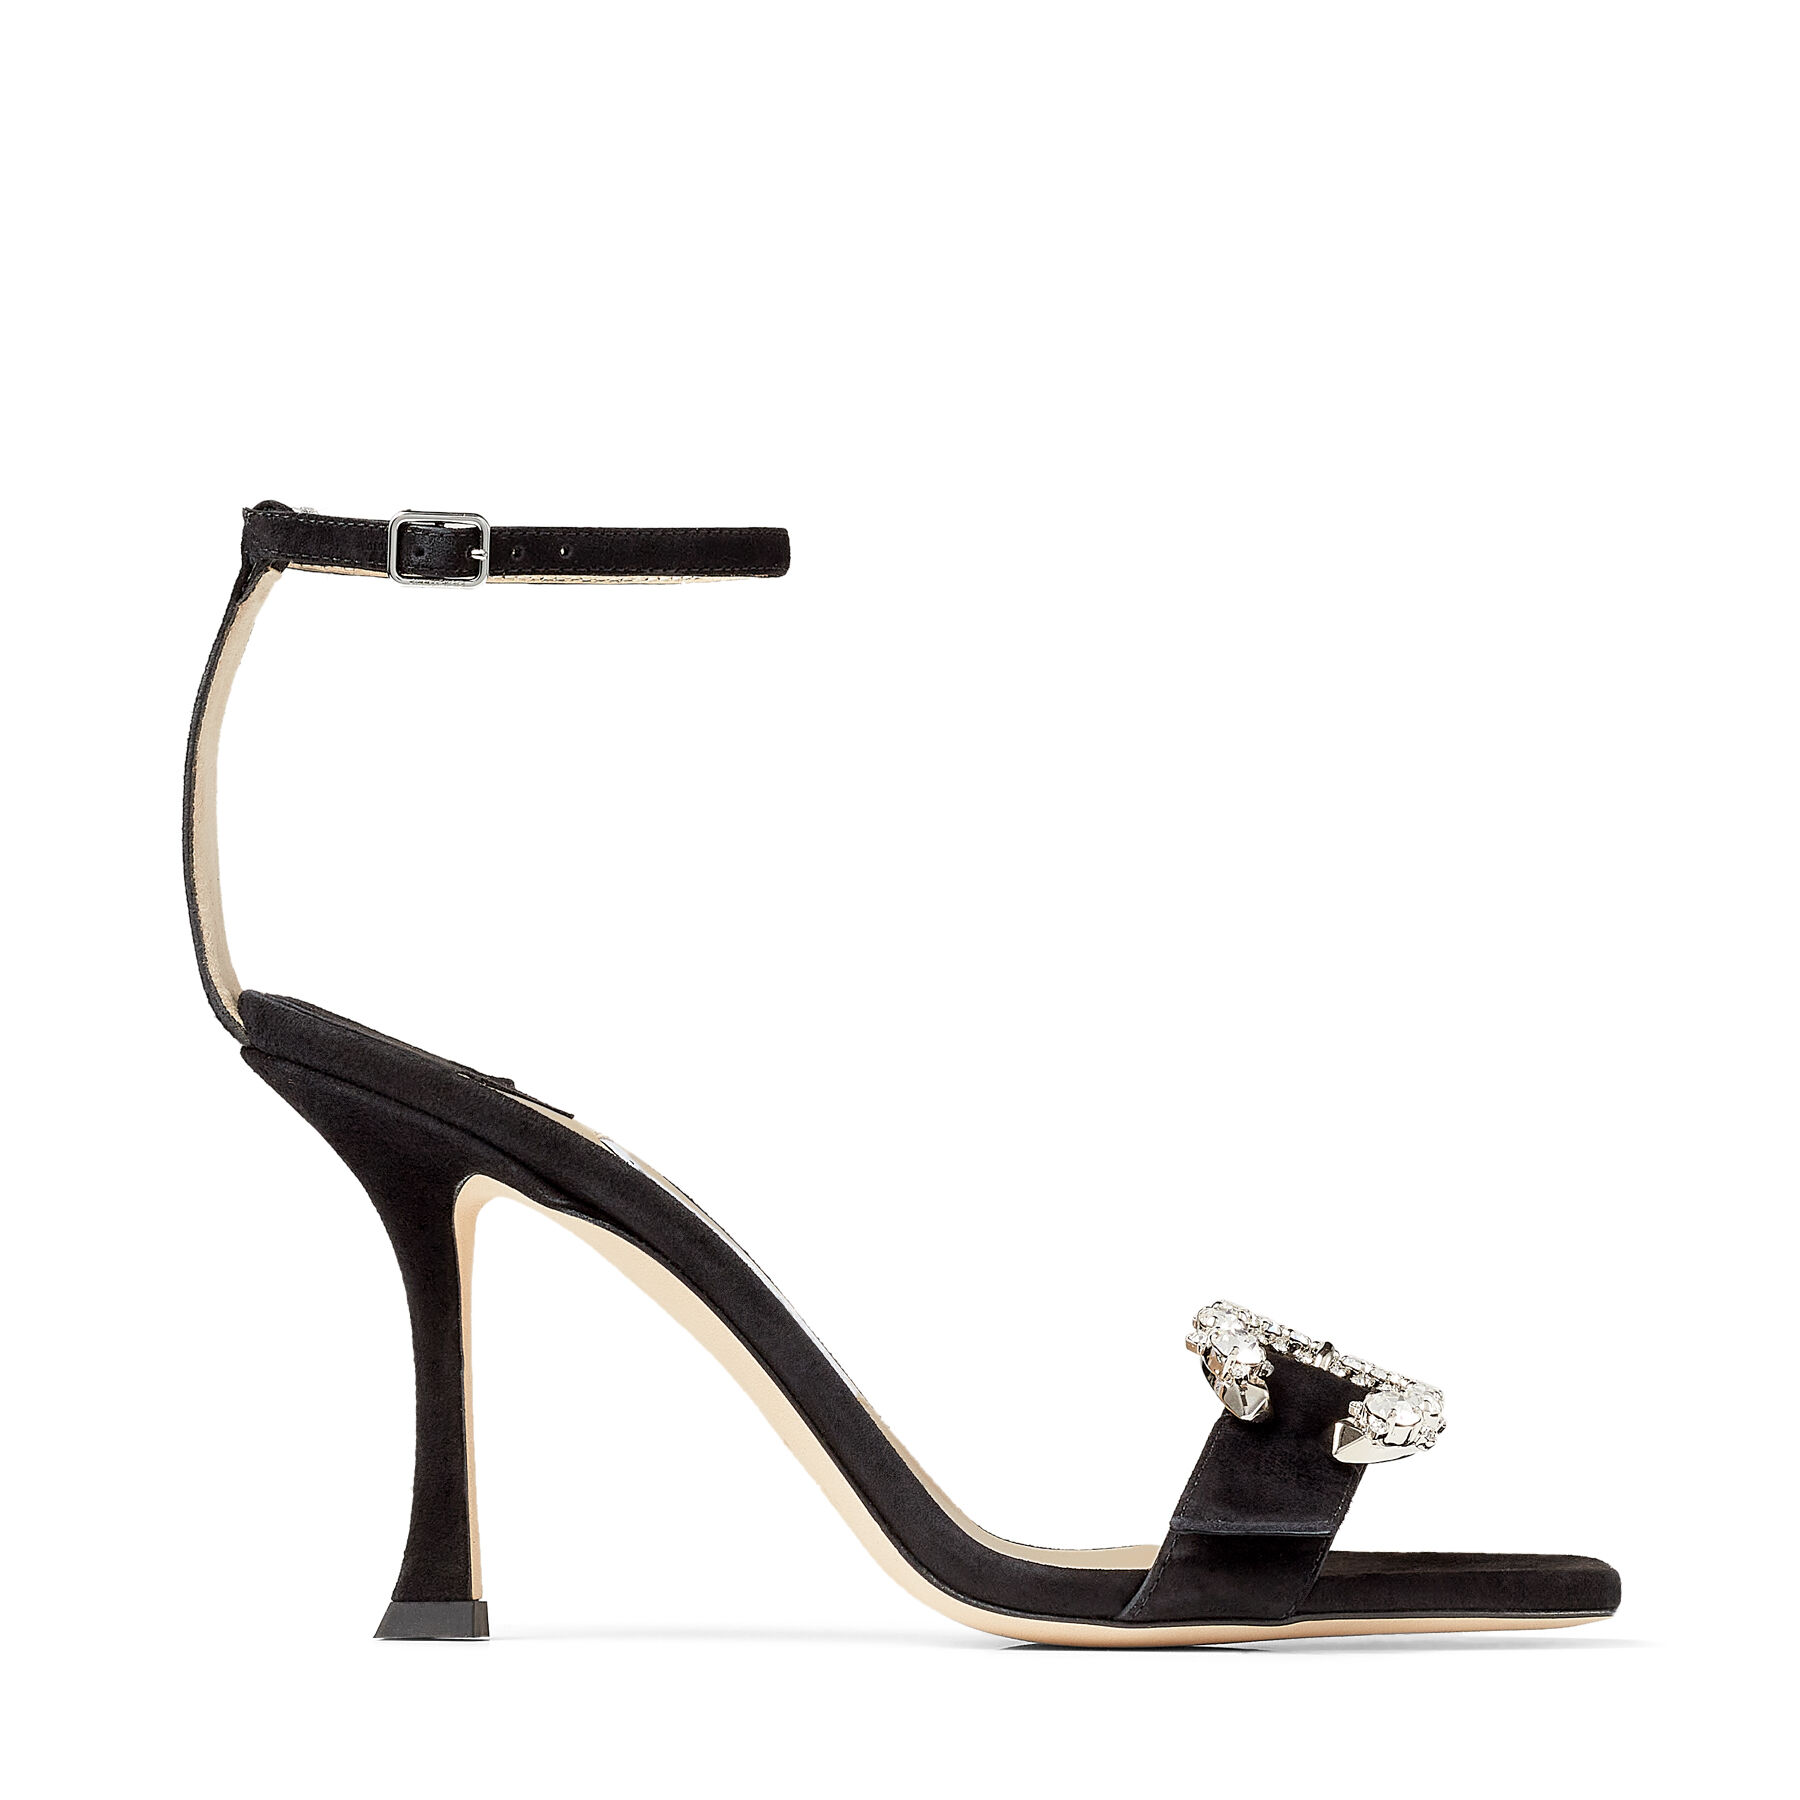 Black Suede Sandals with Crystal Buckle | MARSAI 90 | High Summer 2021 ...